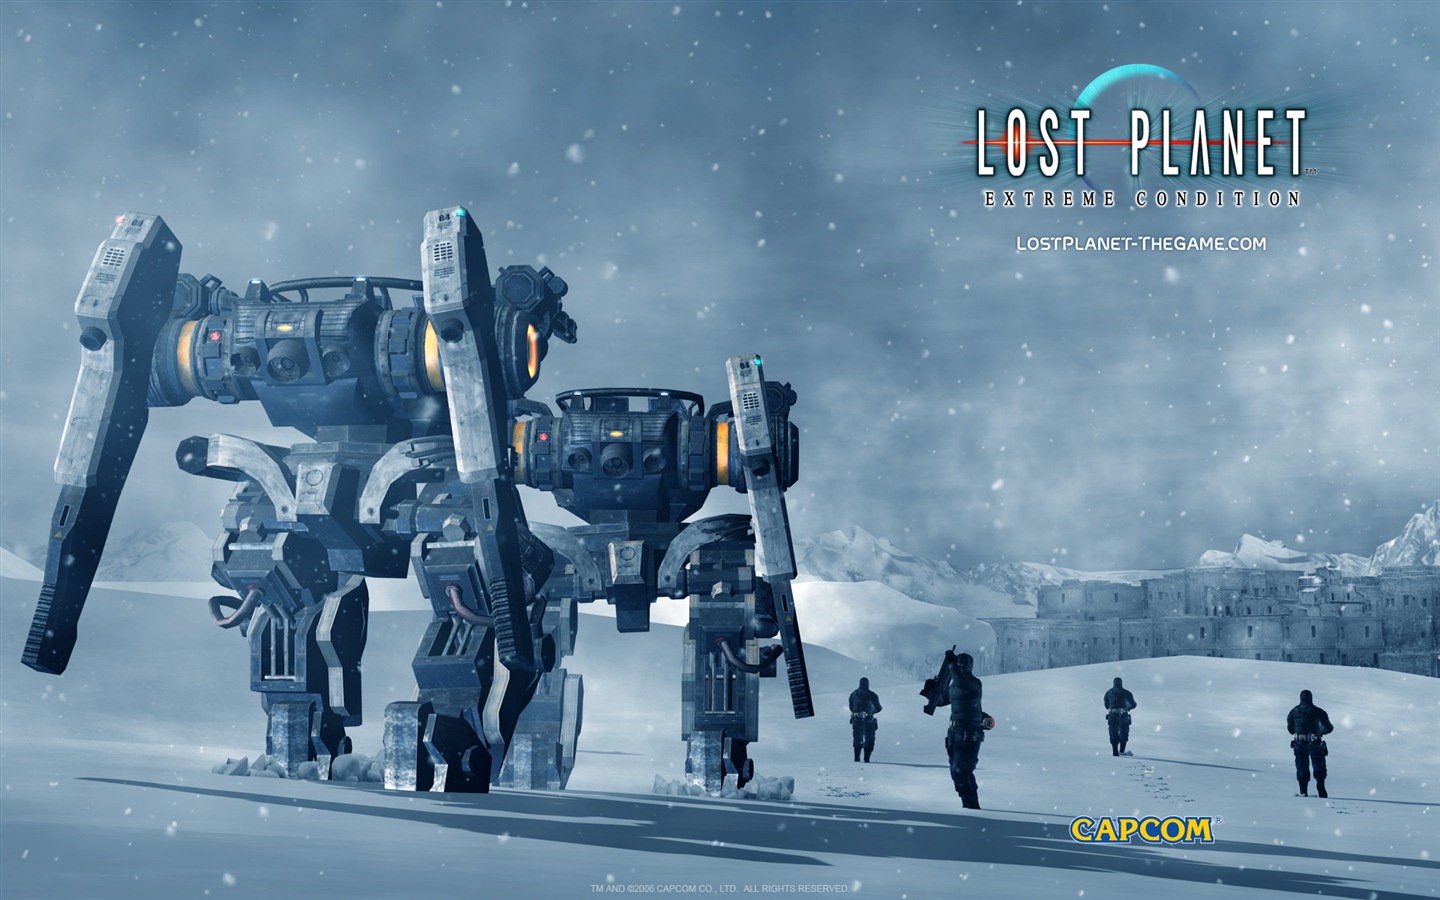 Lost Planet: Extreme Condition HD tapety na plochu #1 - 1440x900